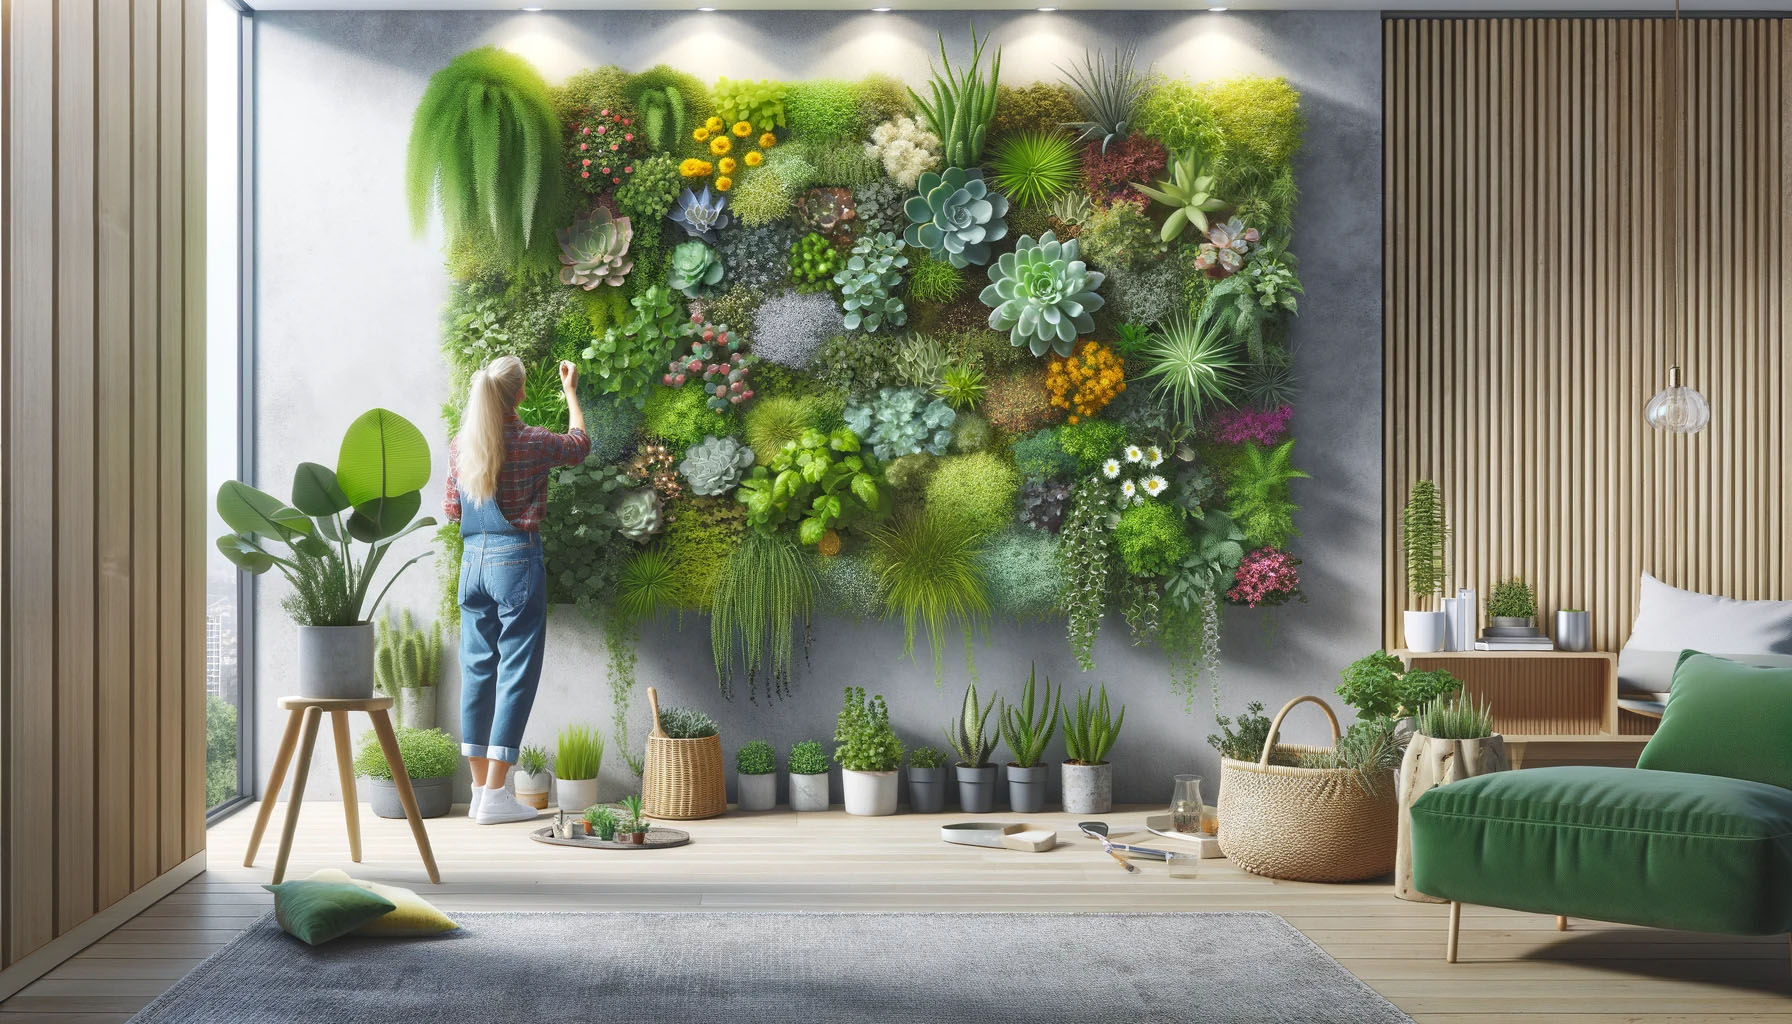 A beautiful and vibrant vertical garden installed on a wall in a modern home setting